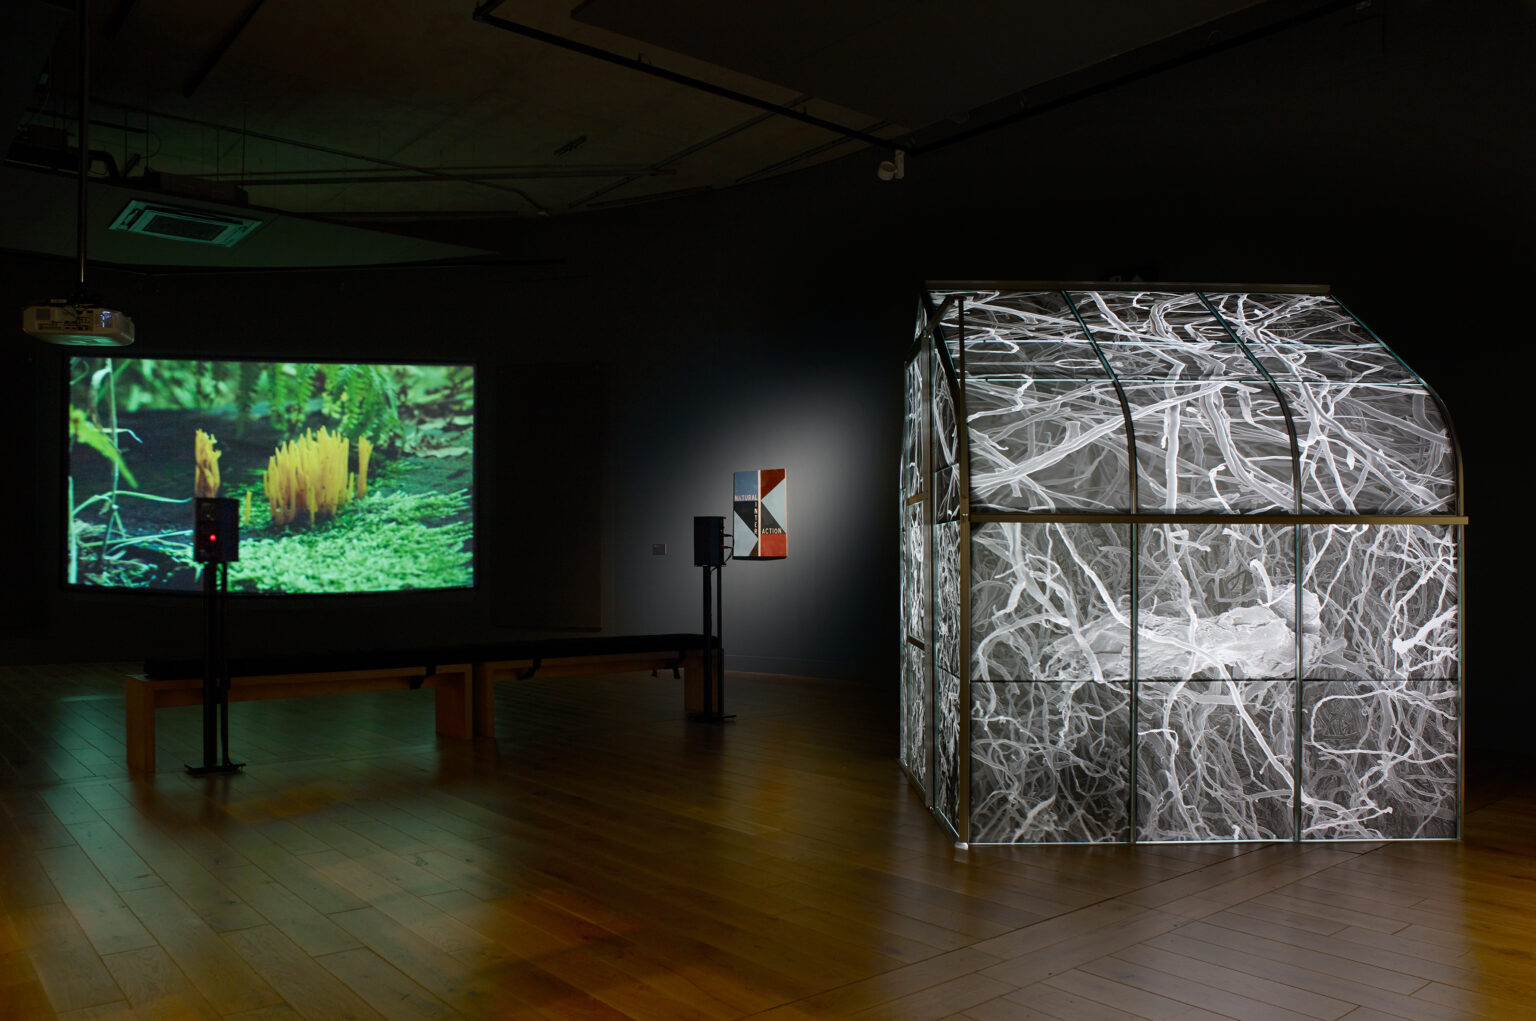 An exhibition space including, to the left, a green and yellow coloured film showing plant life, and to the right a to-scale greenhouse whose glass panes are covered with black and white images of layered lines or tubes.